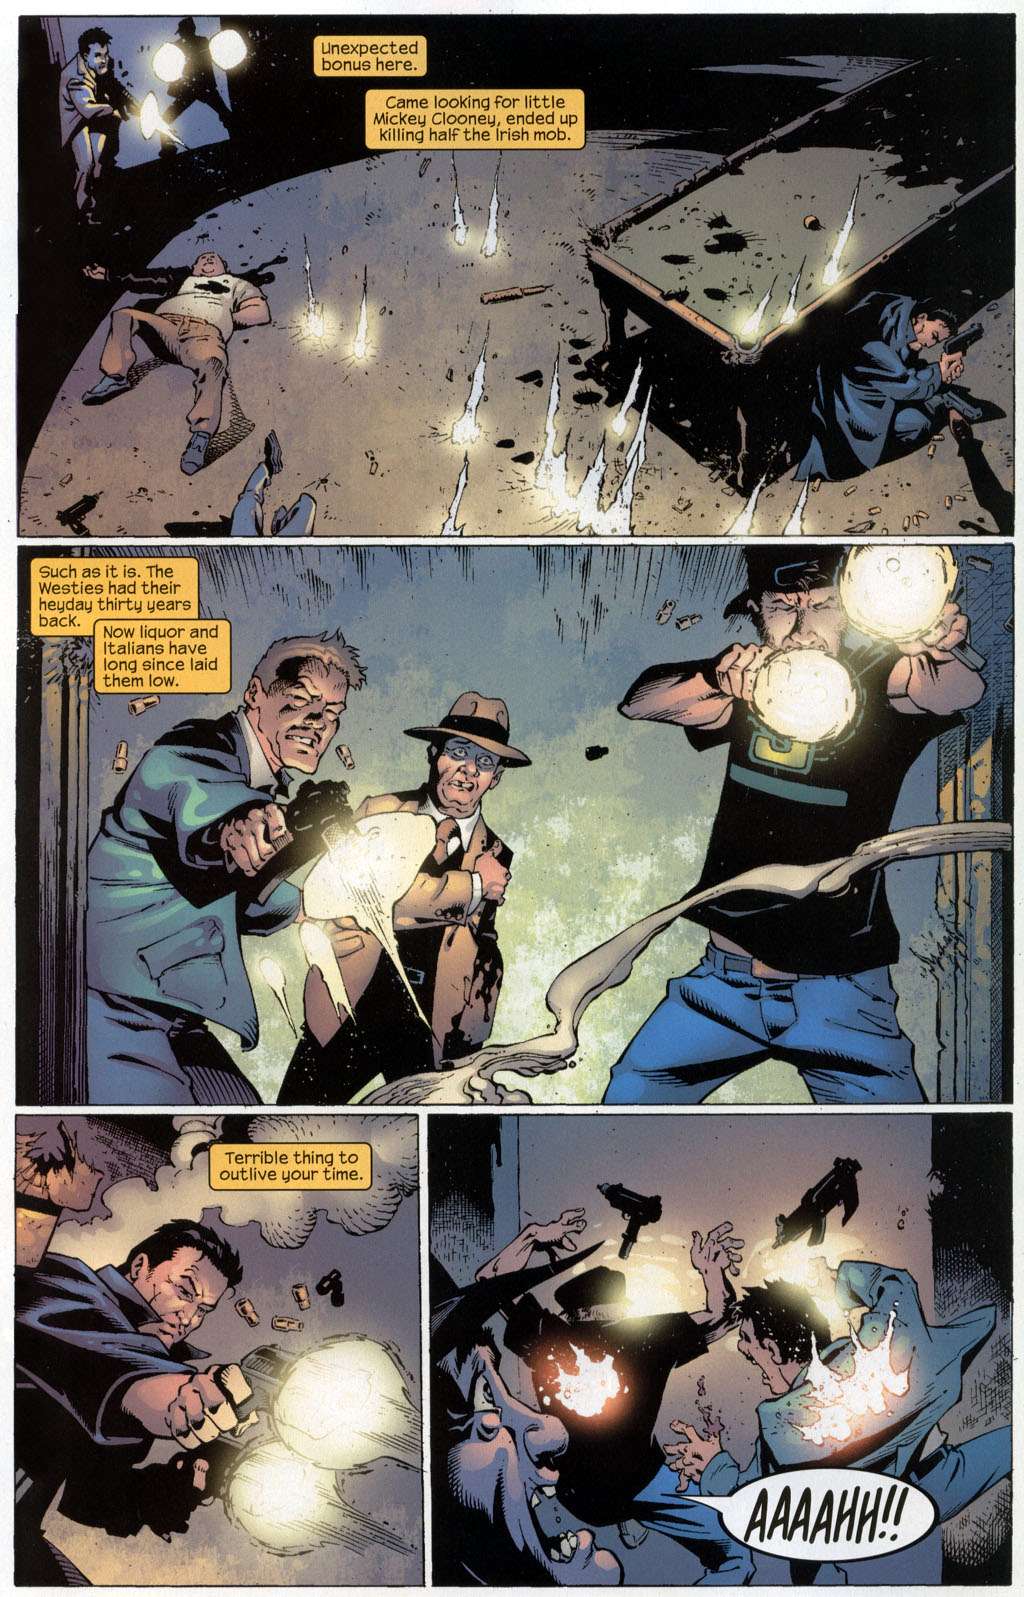 The Punisher (2001) issue 33 - Confederacy of Dunces #01 - Page 8